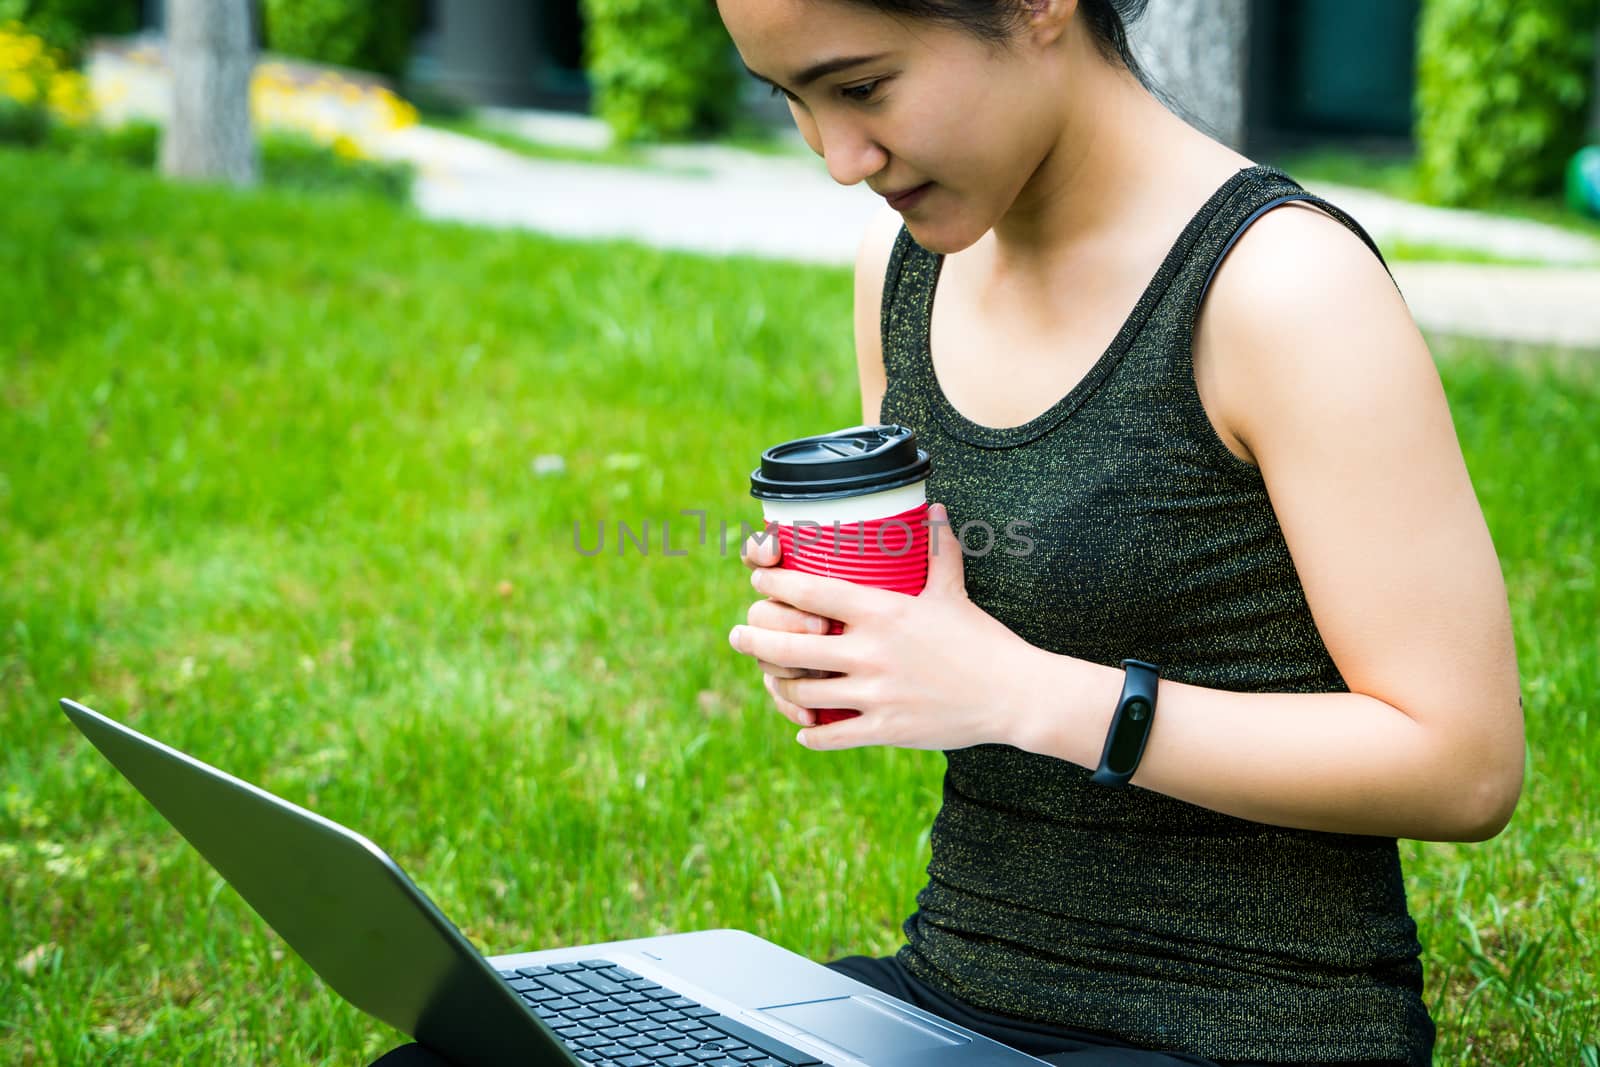 A young woman is looking at laptop computer while holding a red  by psodaz